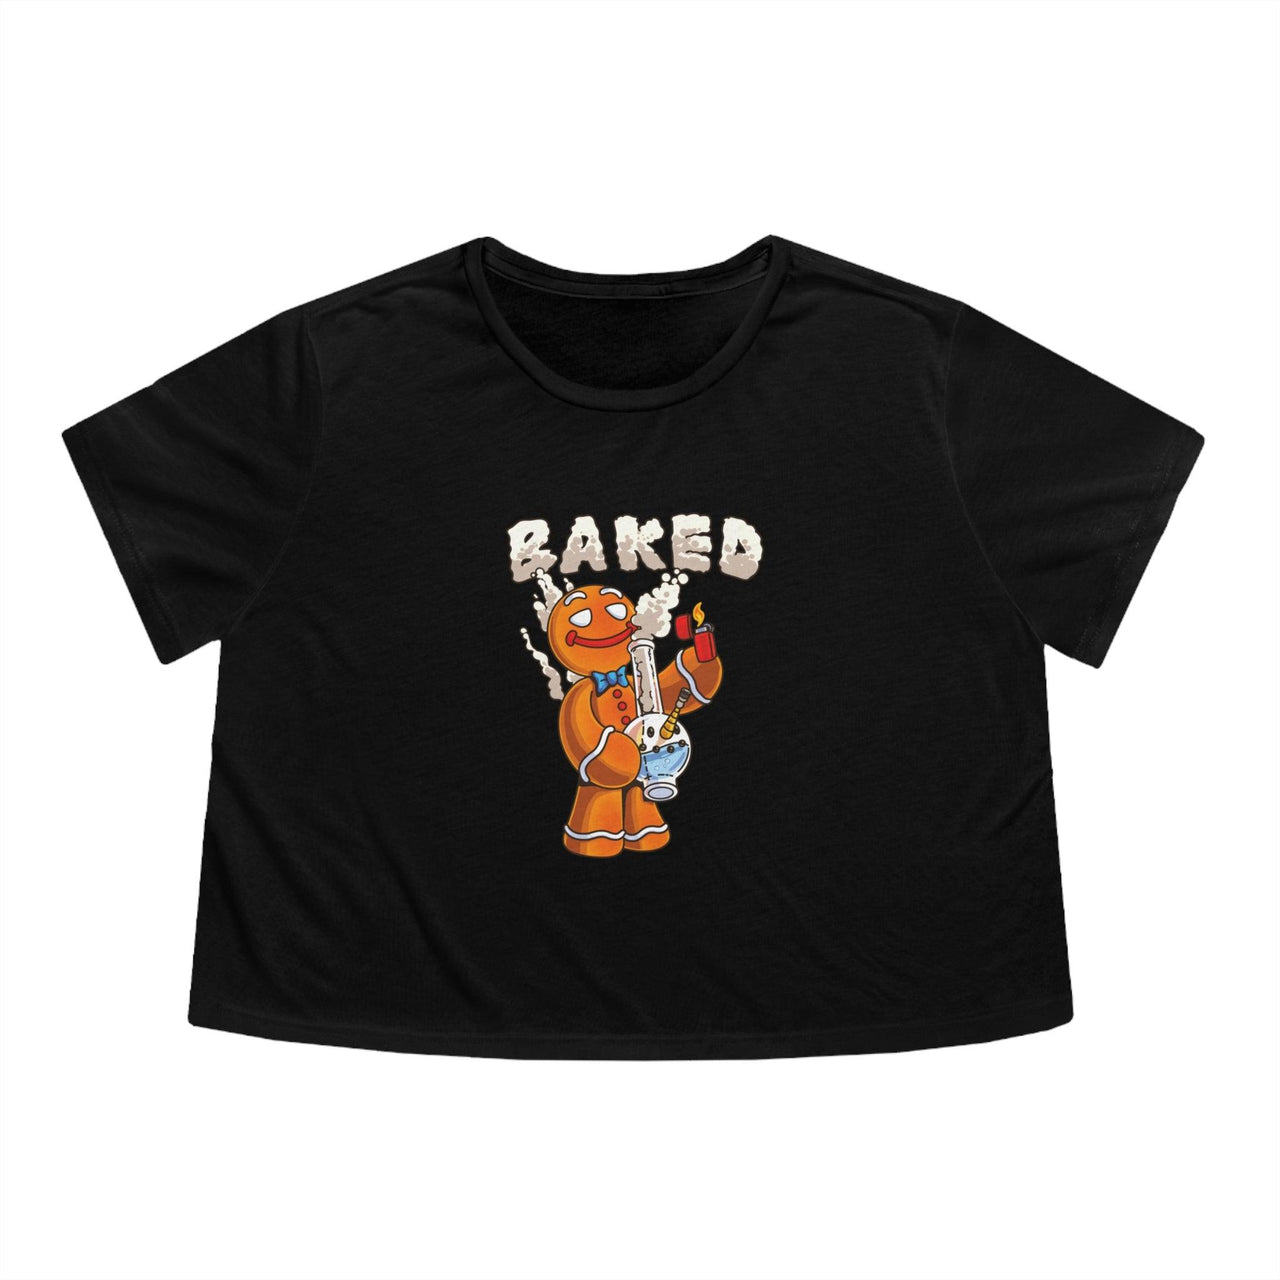 Baked - Women's Flowy Cropped Tee - Shaneinvasion